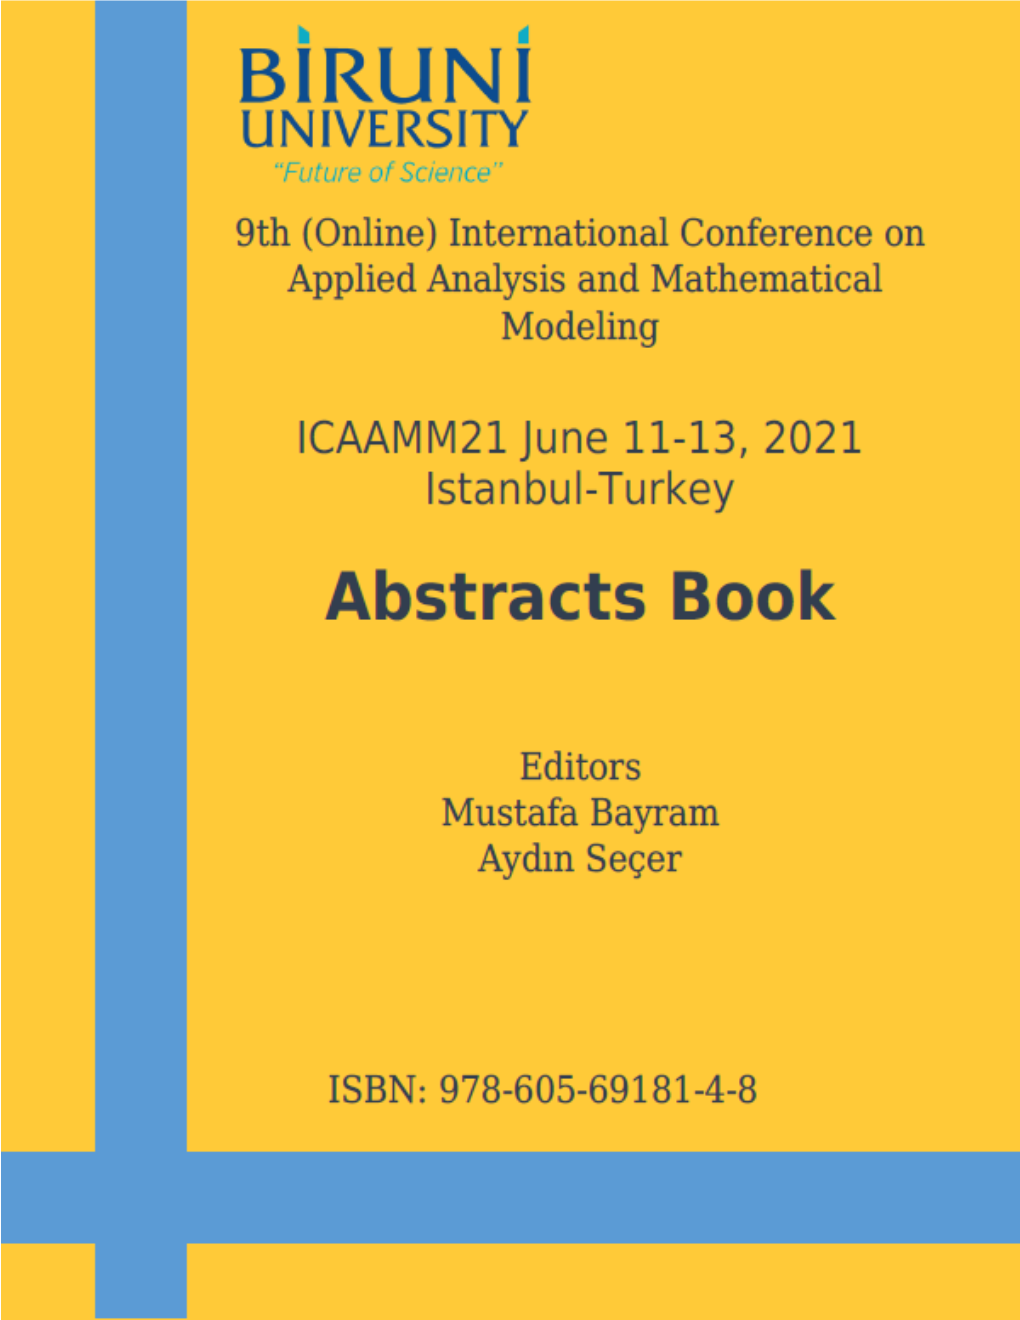 ICAAMM 2021 Conference Abstract Book